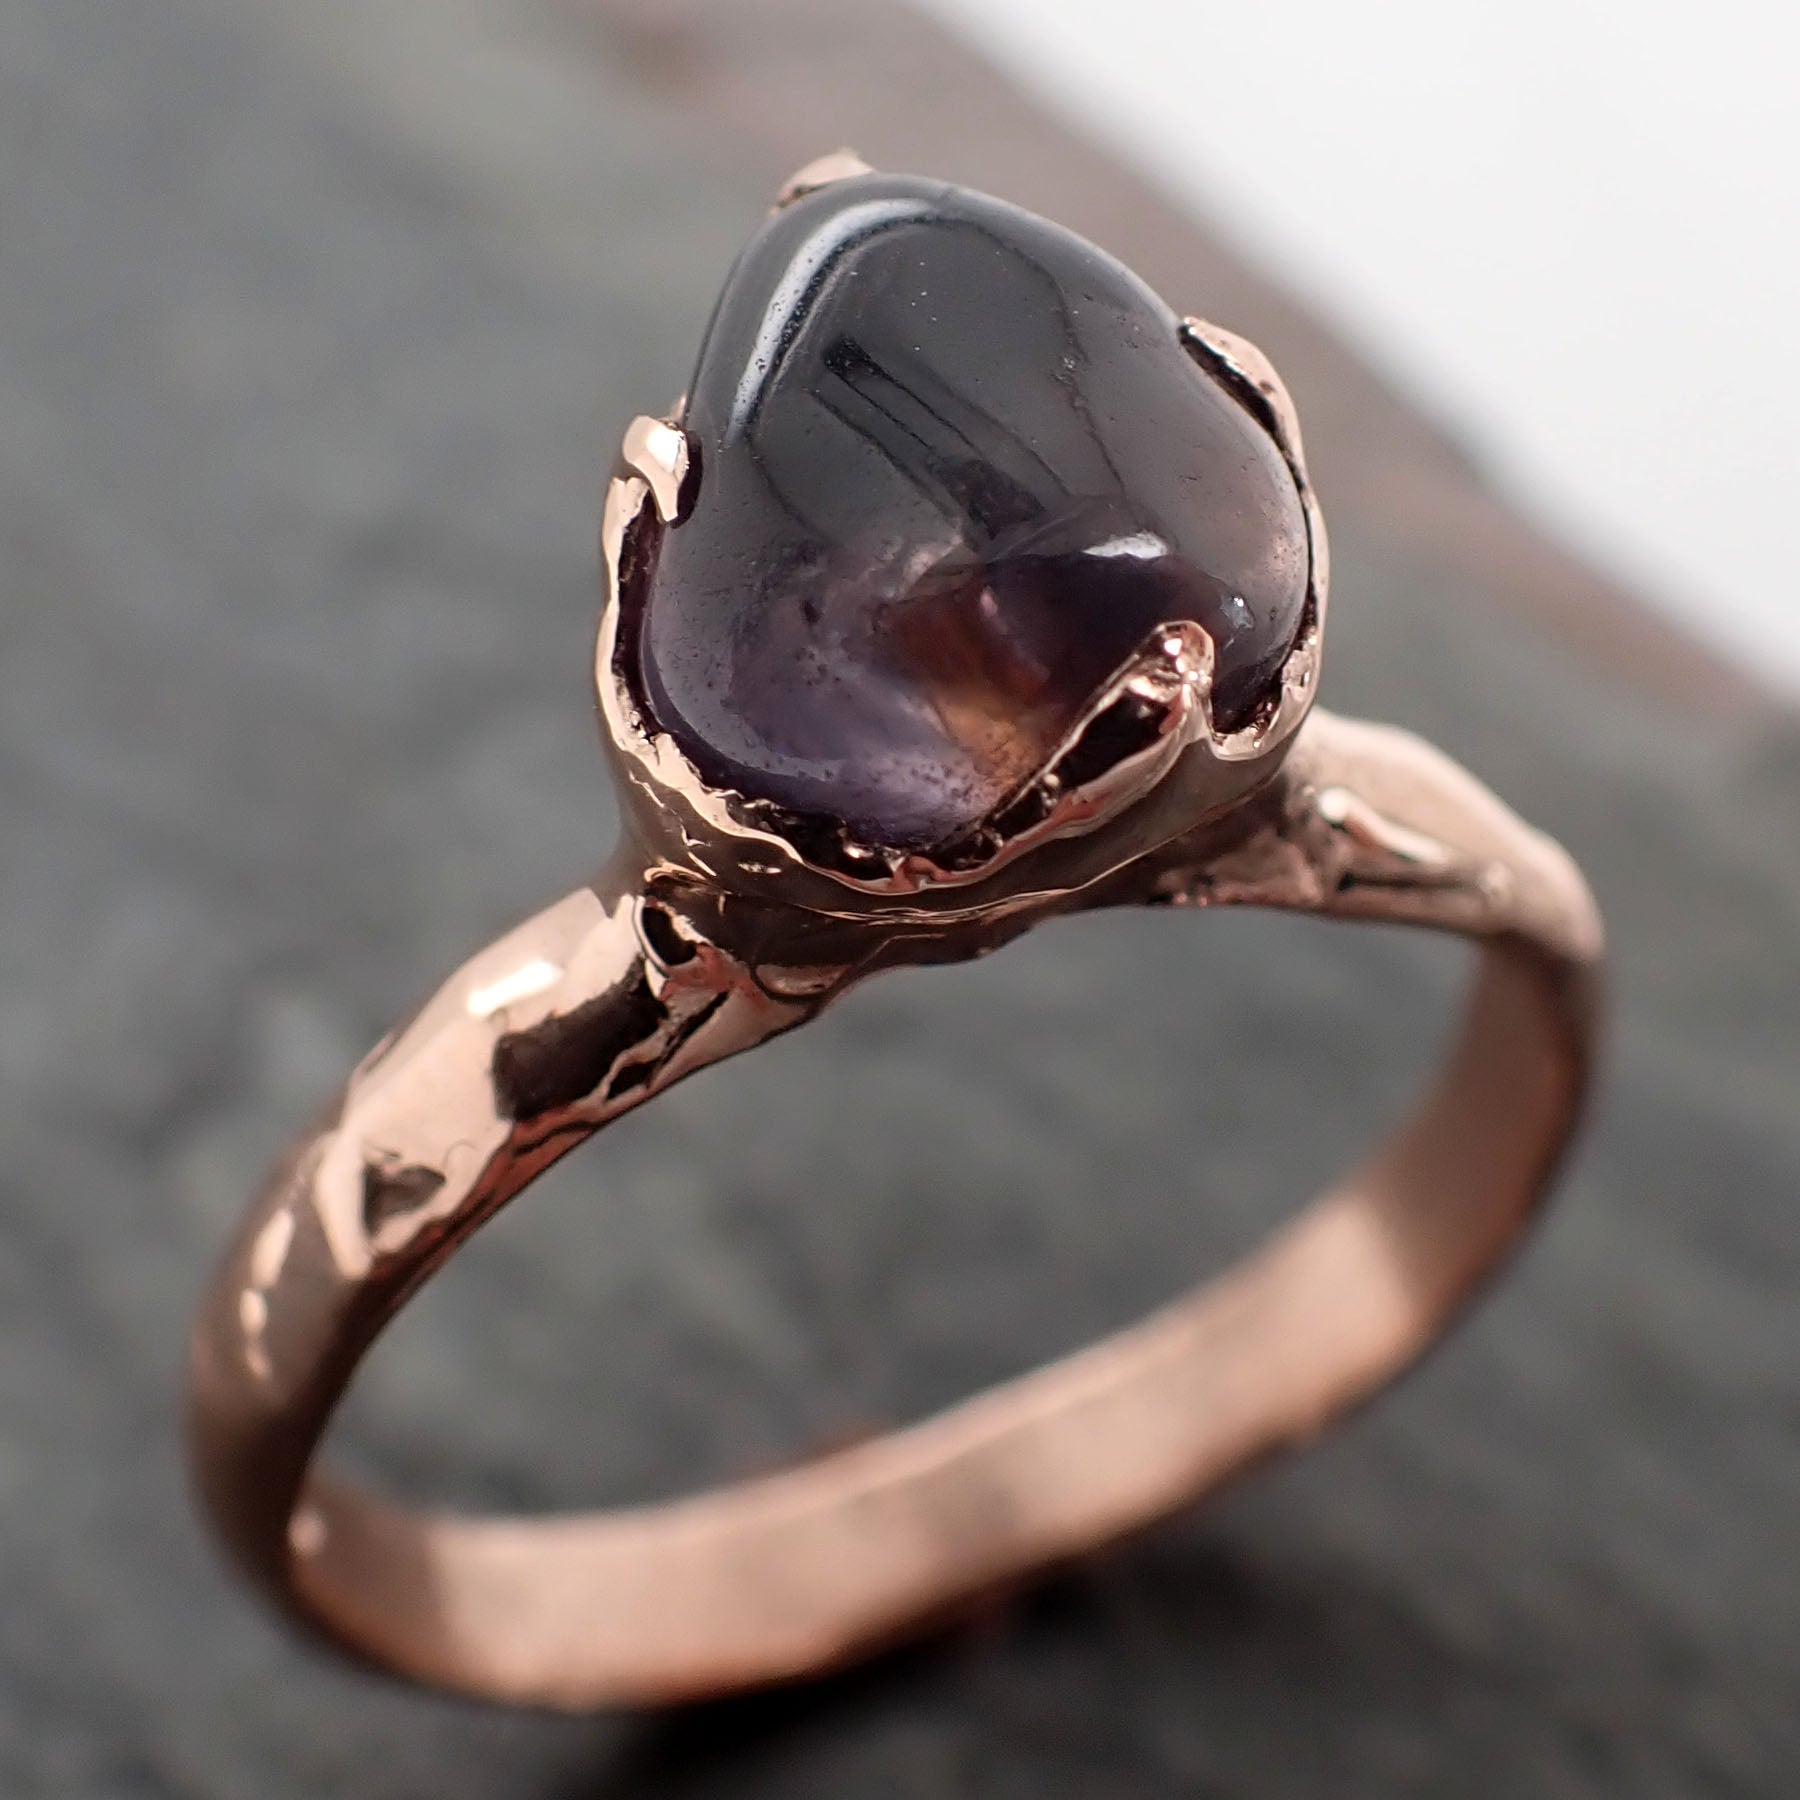 Sapphire Tumbled Purple tumbled 14k Rose gold Solitaire gemstone ring 2880